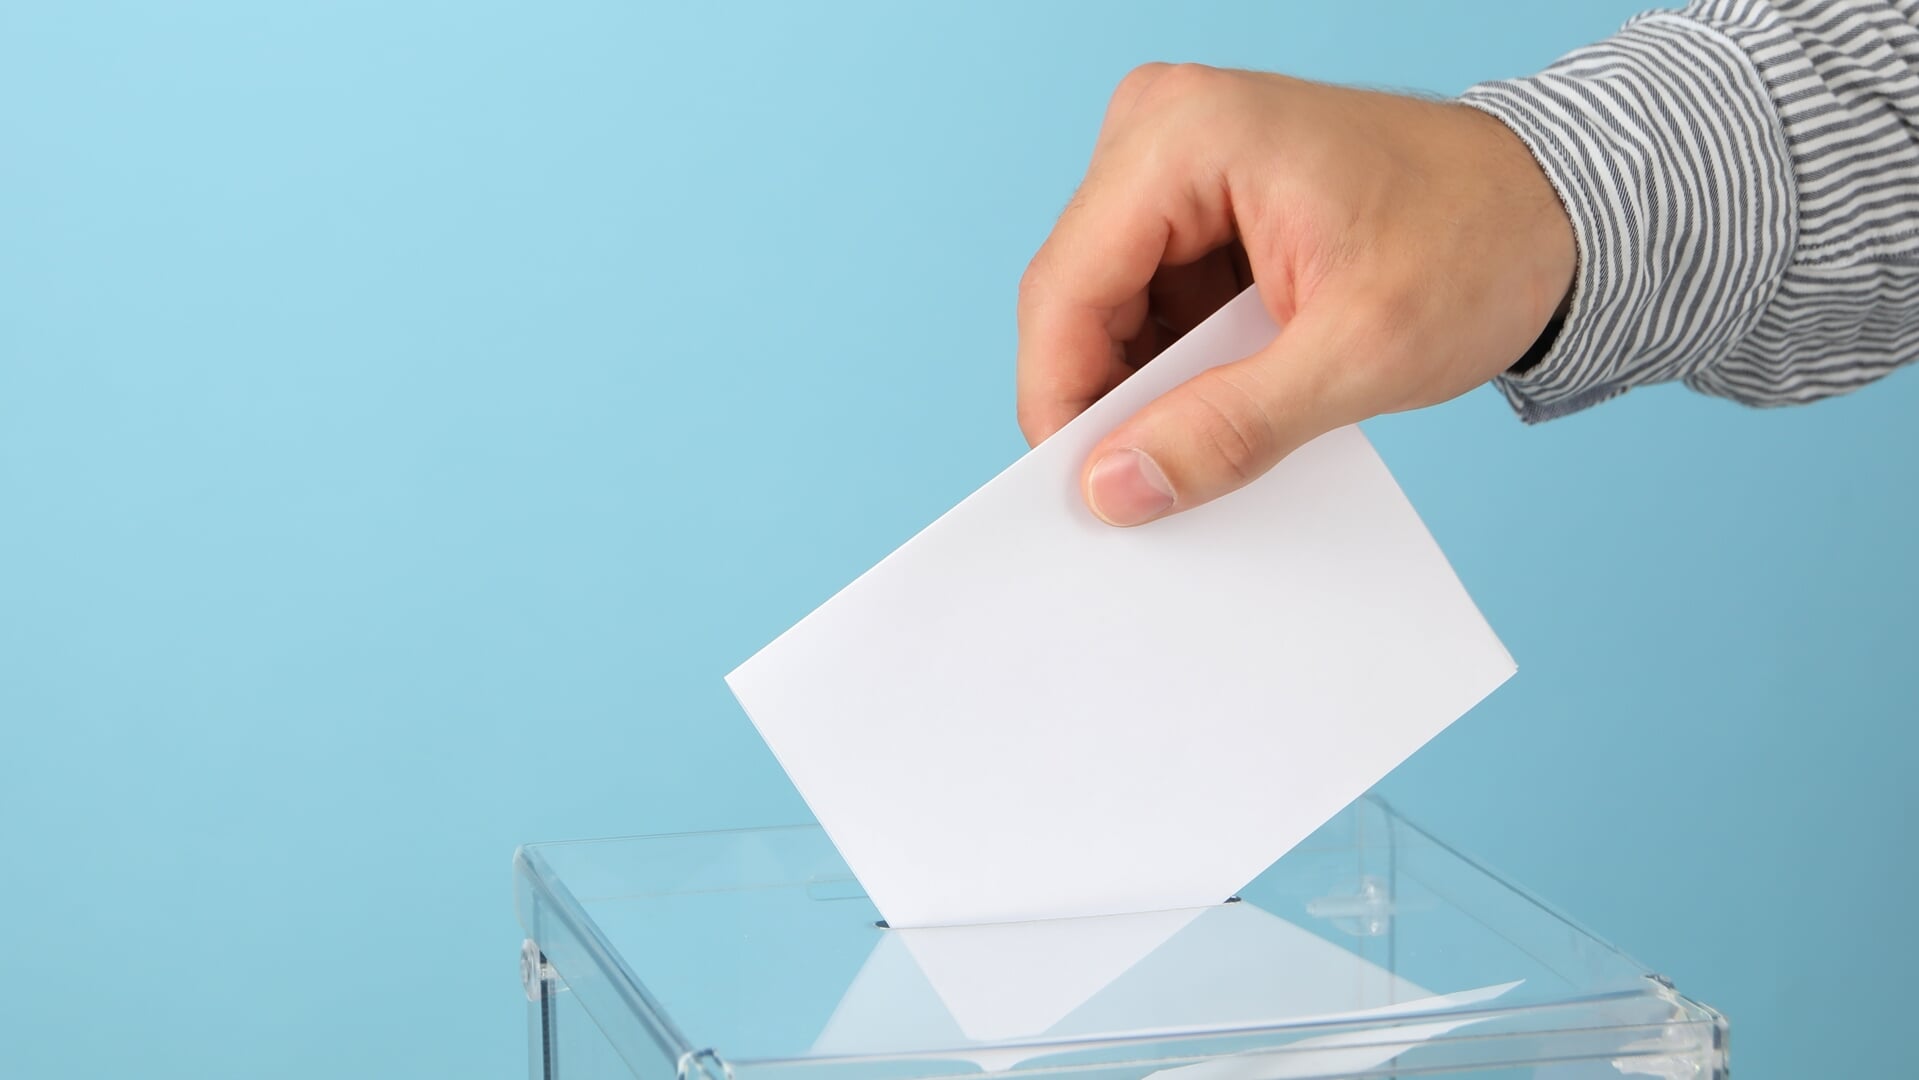 Man putting ballot into voting box on blue background